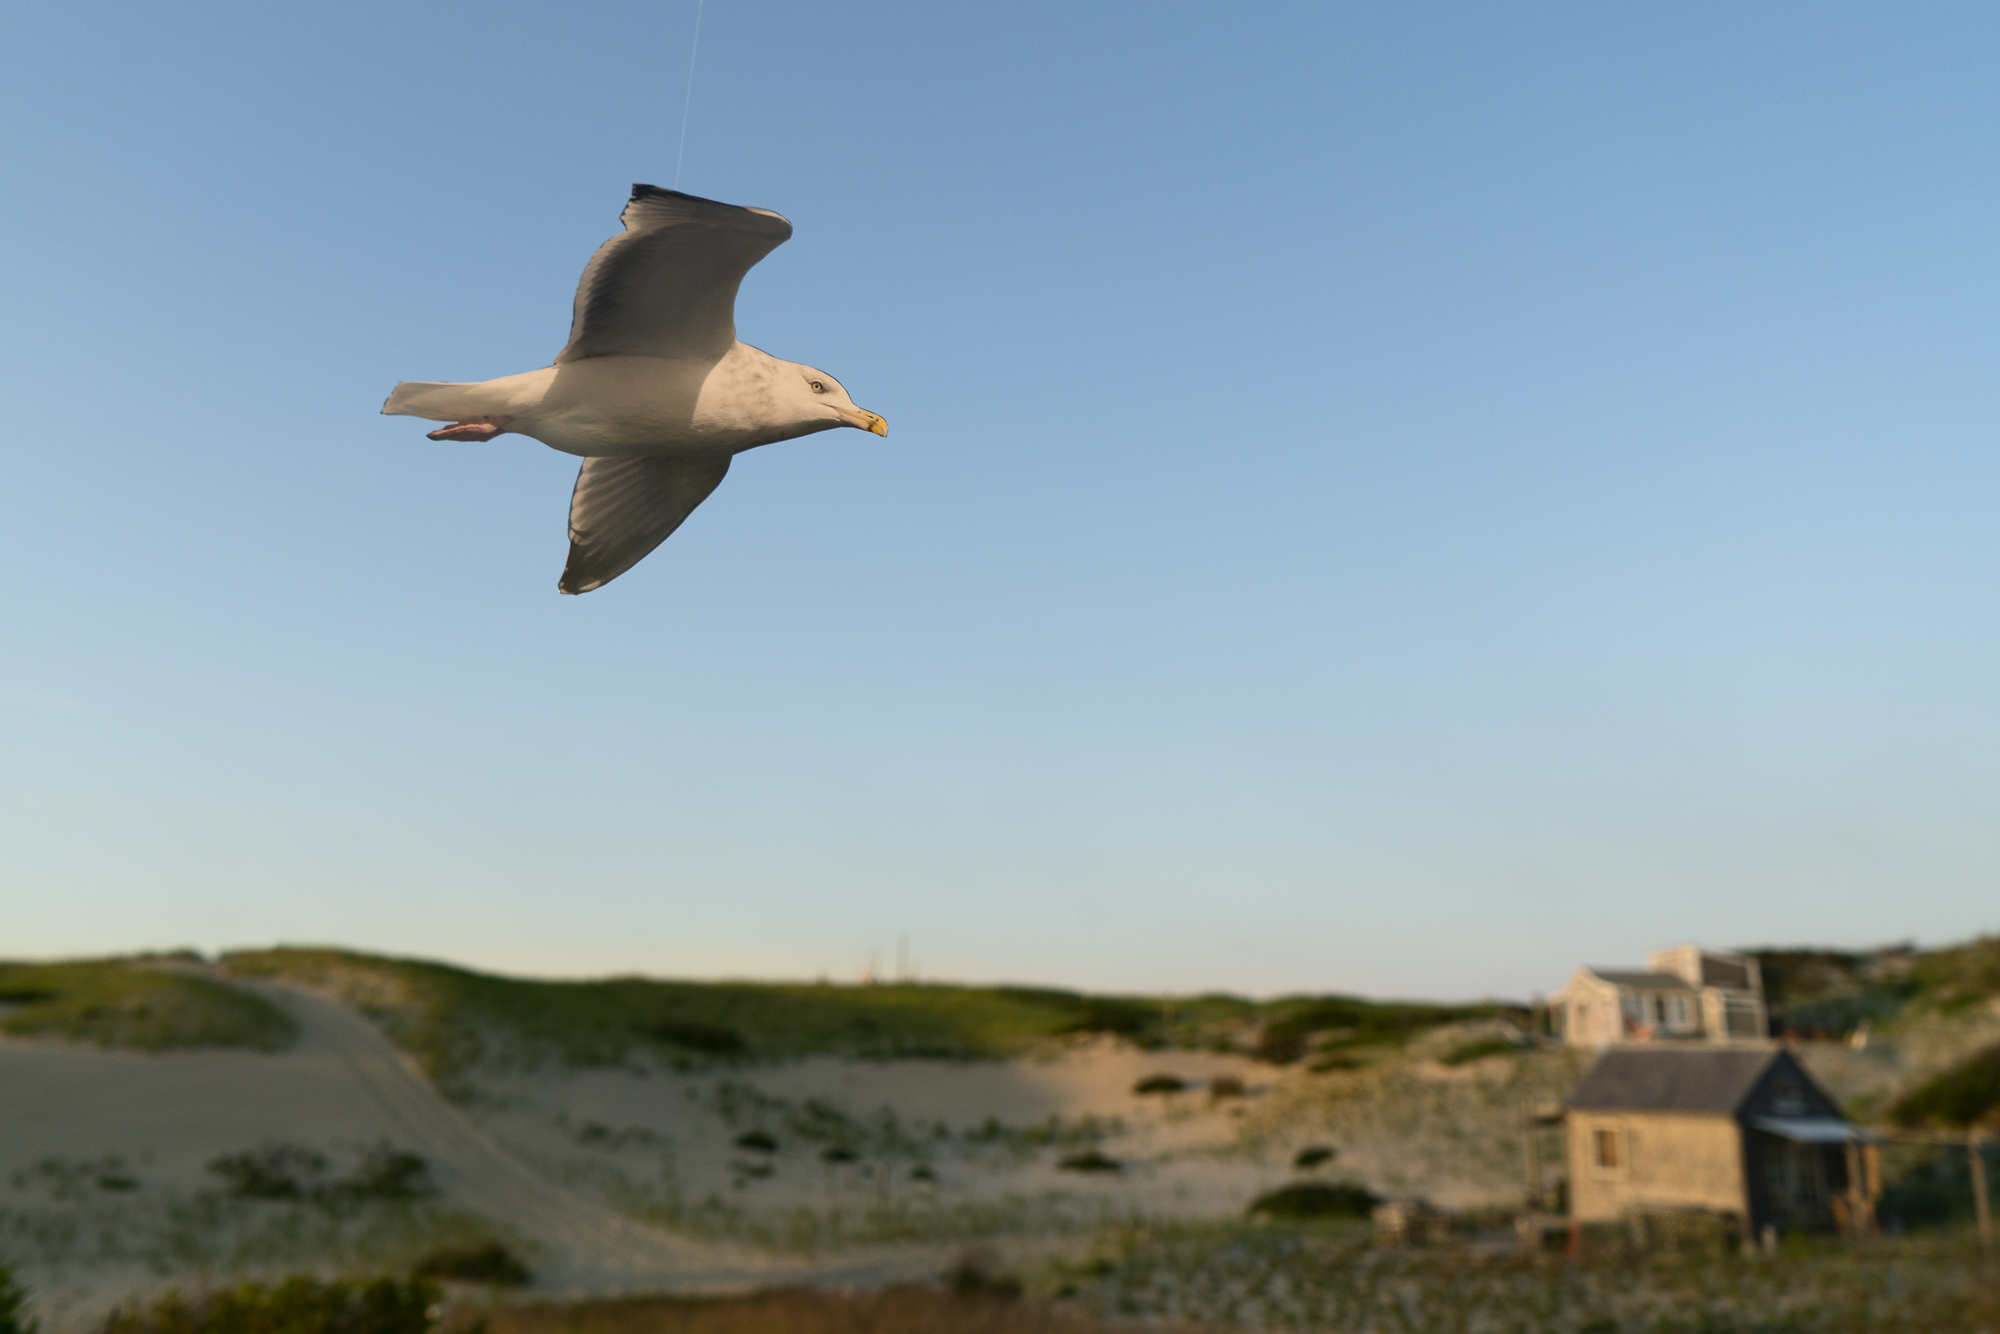 A paper cutout of a photograph of a Great Black-backed gull held aloft by fishing line. The bird is framed against a blue sky and “flying” over sand dunes and cottages warmed by the glow of sunset.